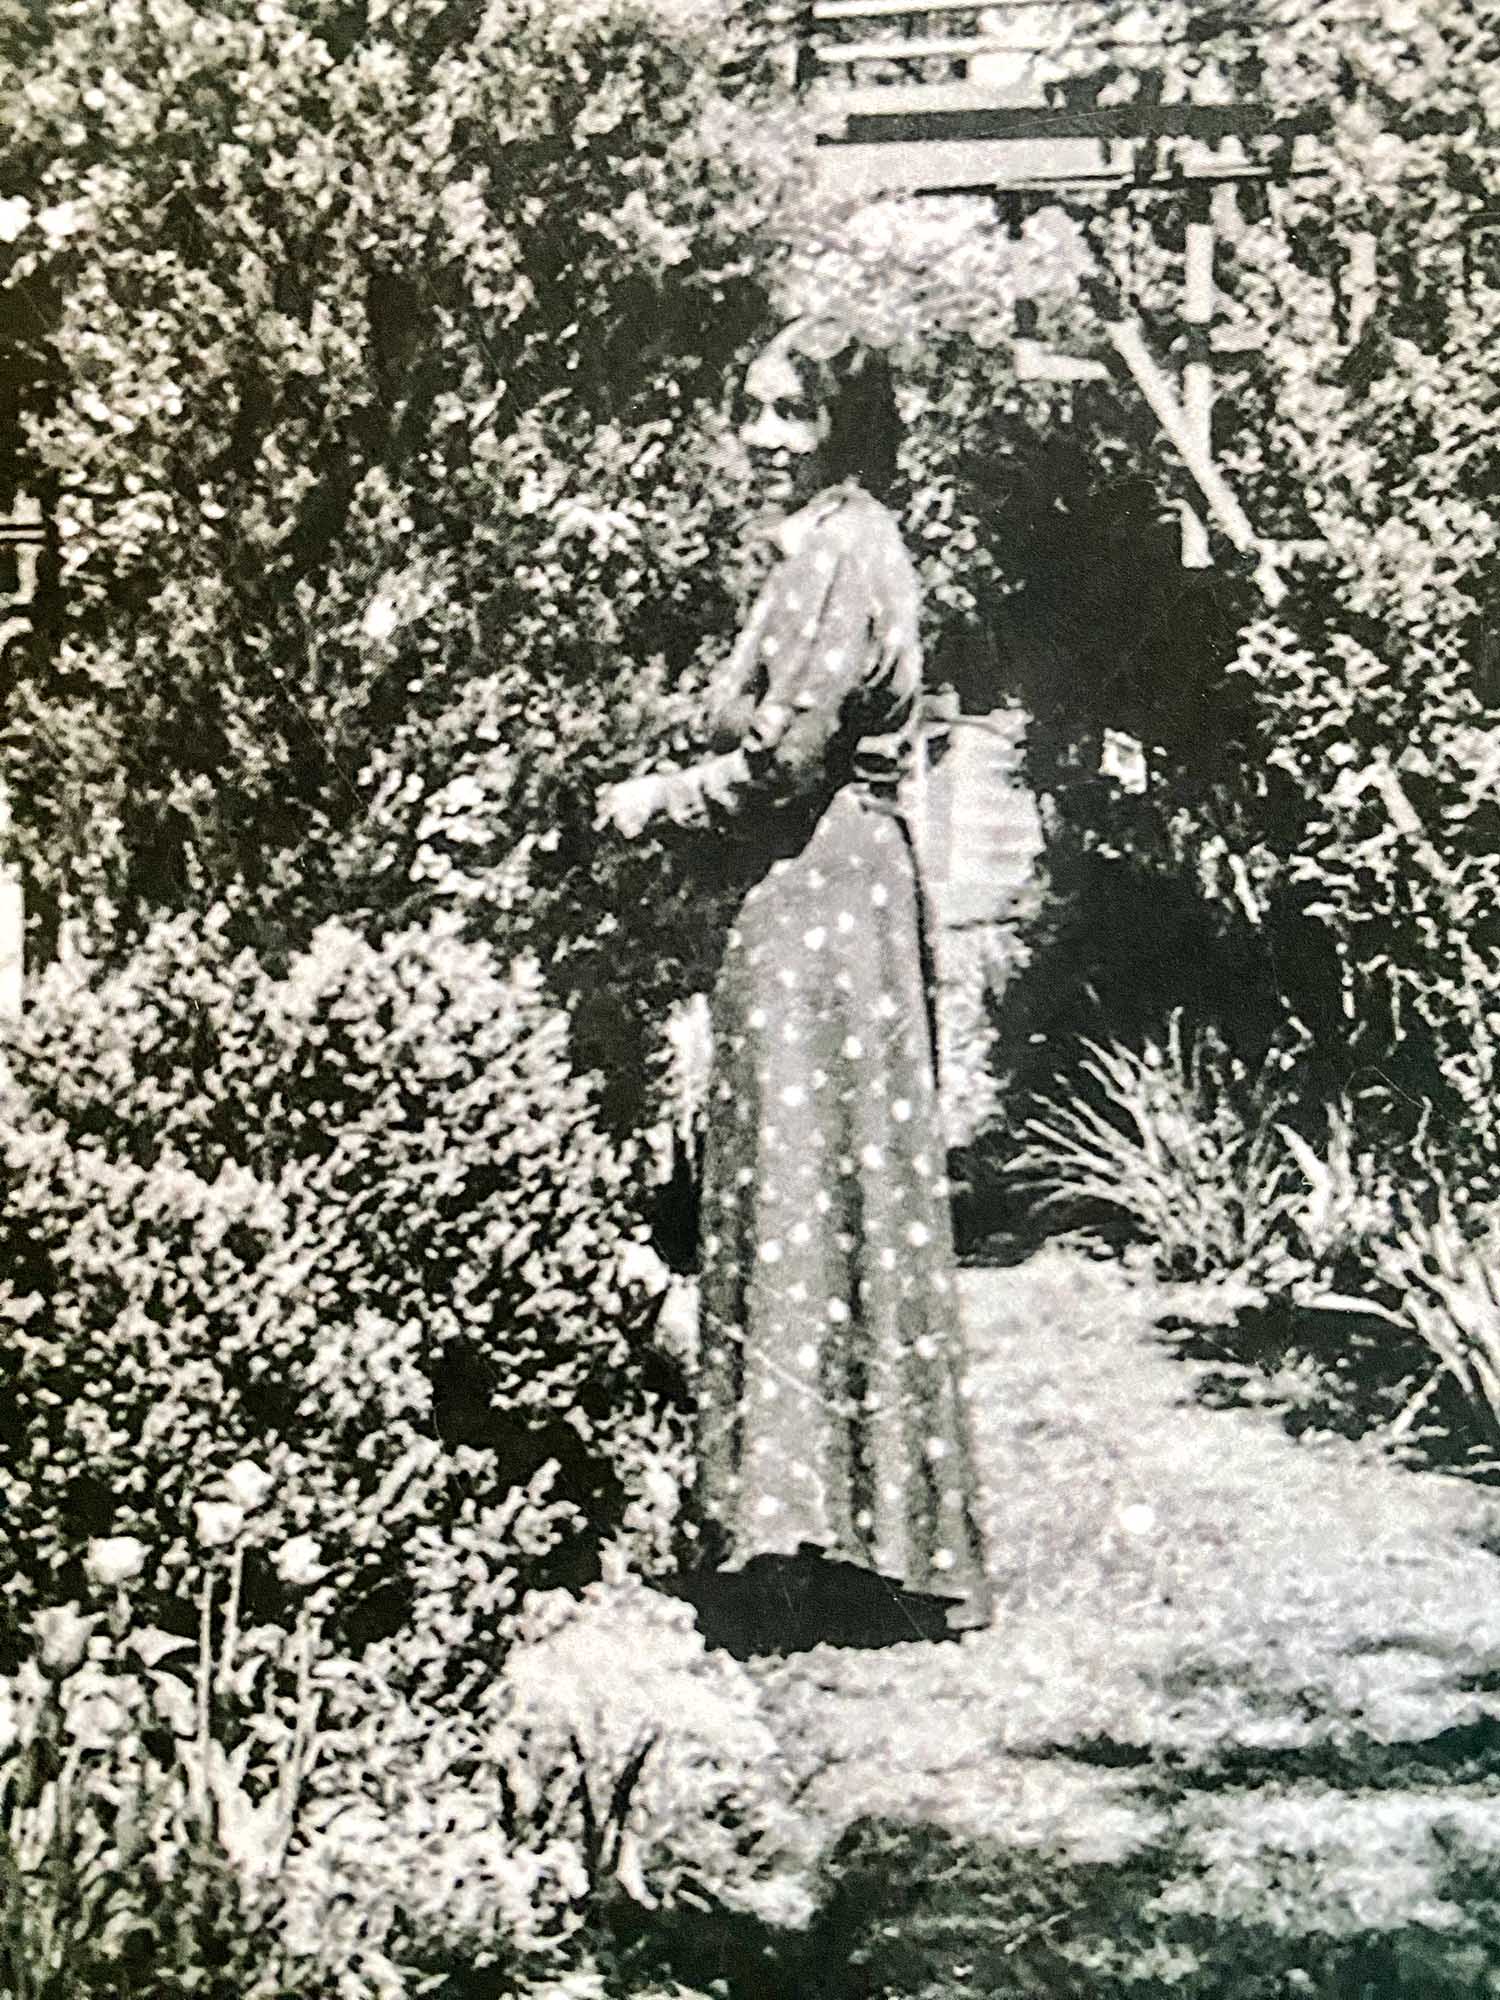 Anne Spencer walks through her garden in a polka dot dress in a black and white photo.